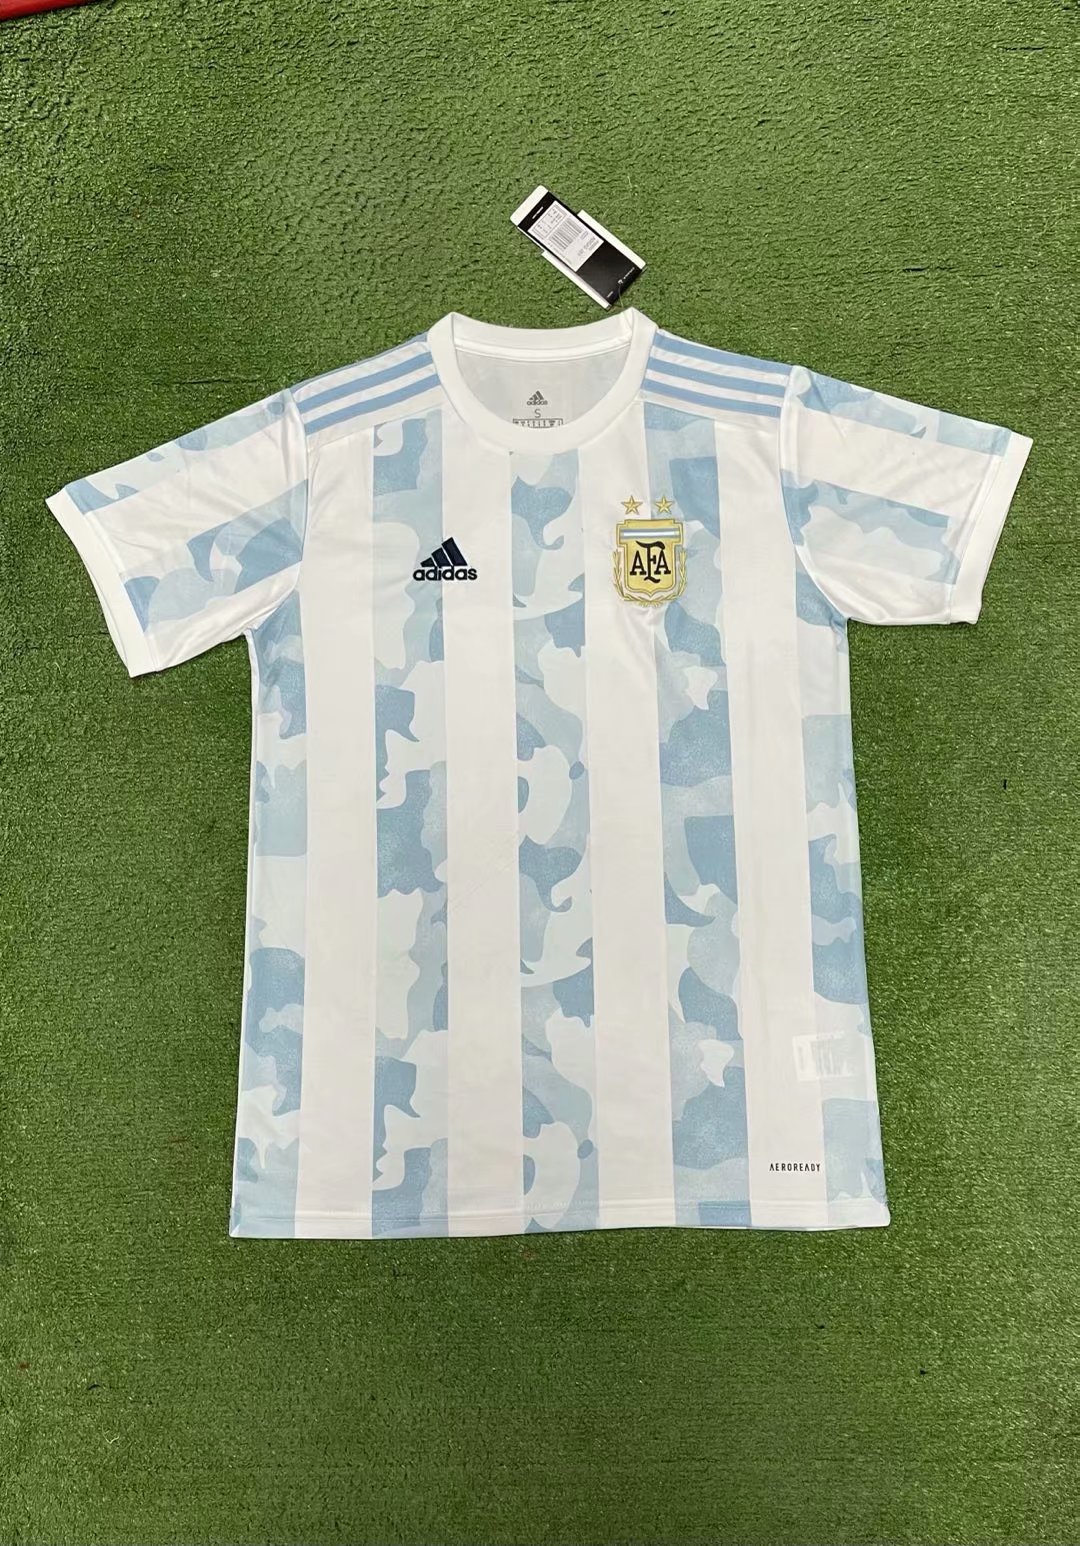 2020 Argentina home jersey